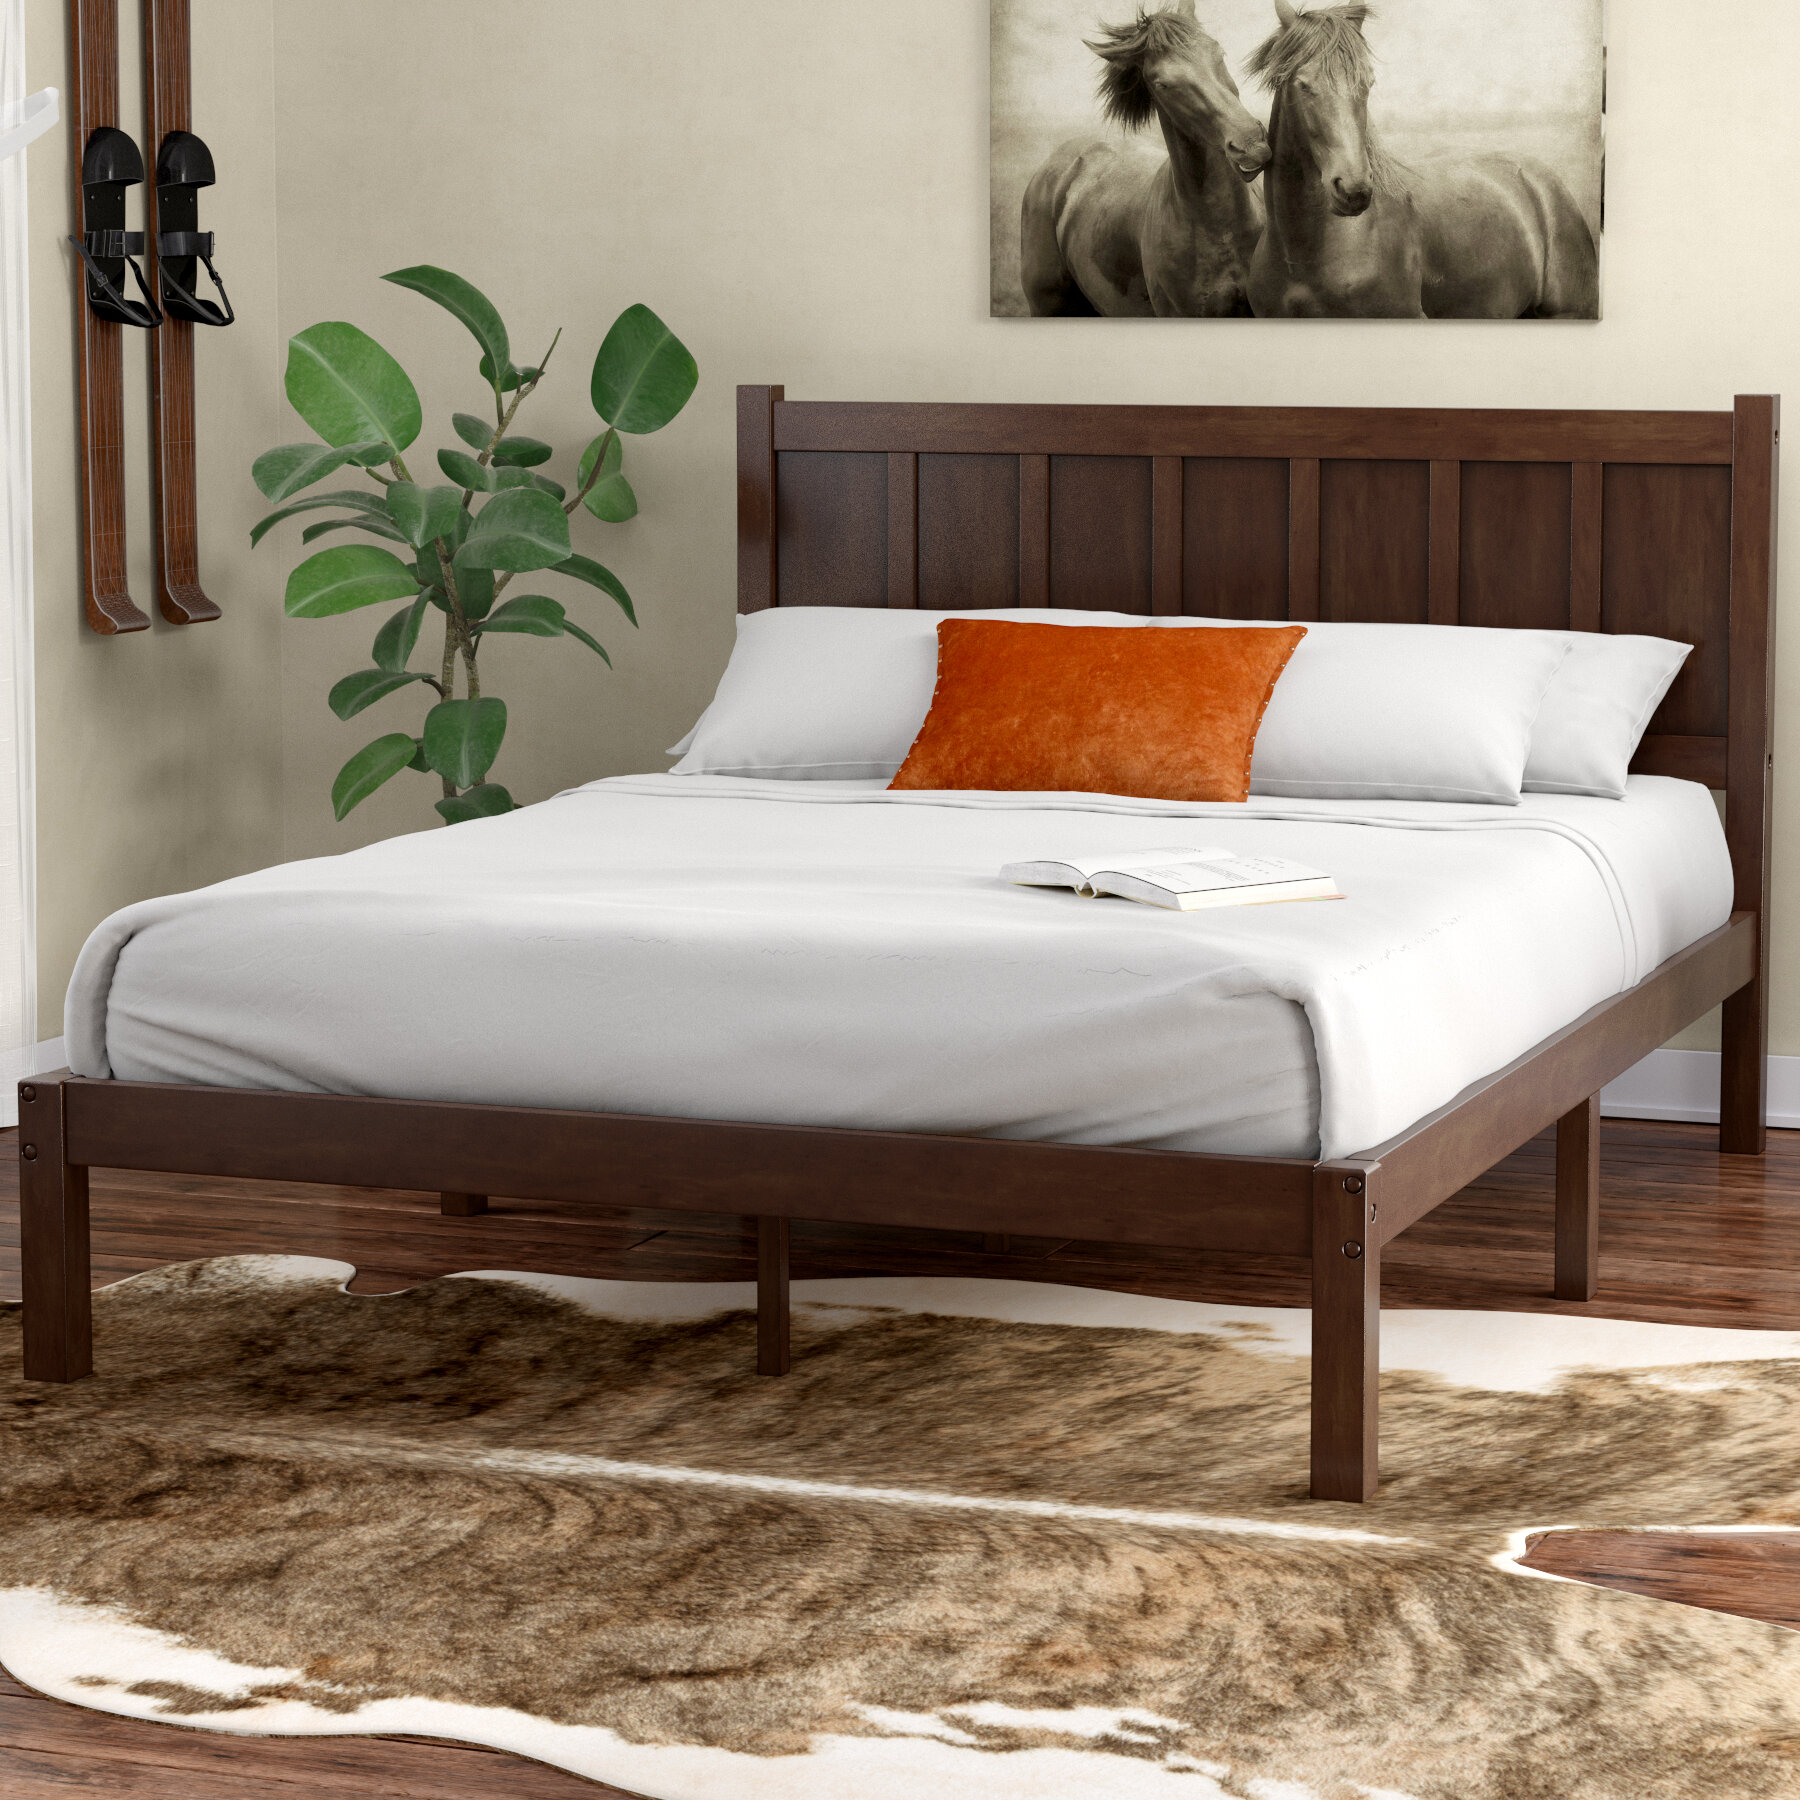 Rustic Beds Frames Free Shipping Over 35 Wayfair